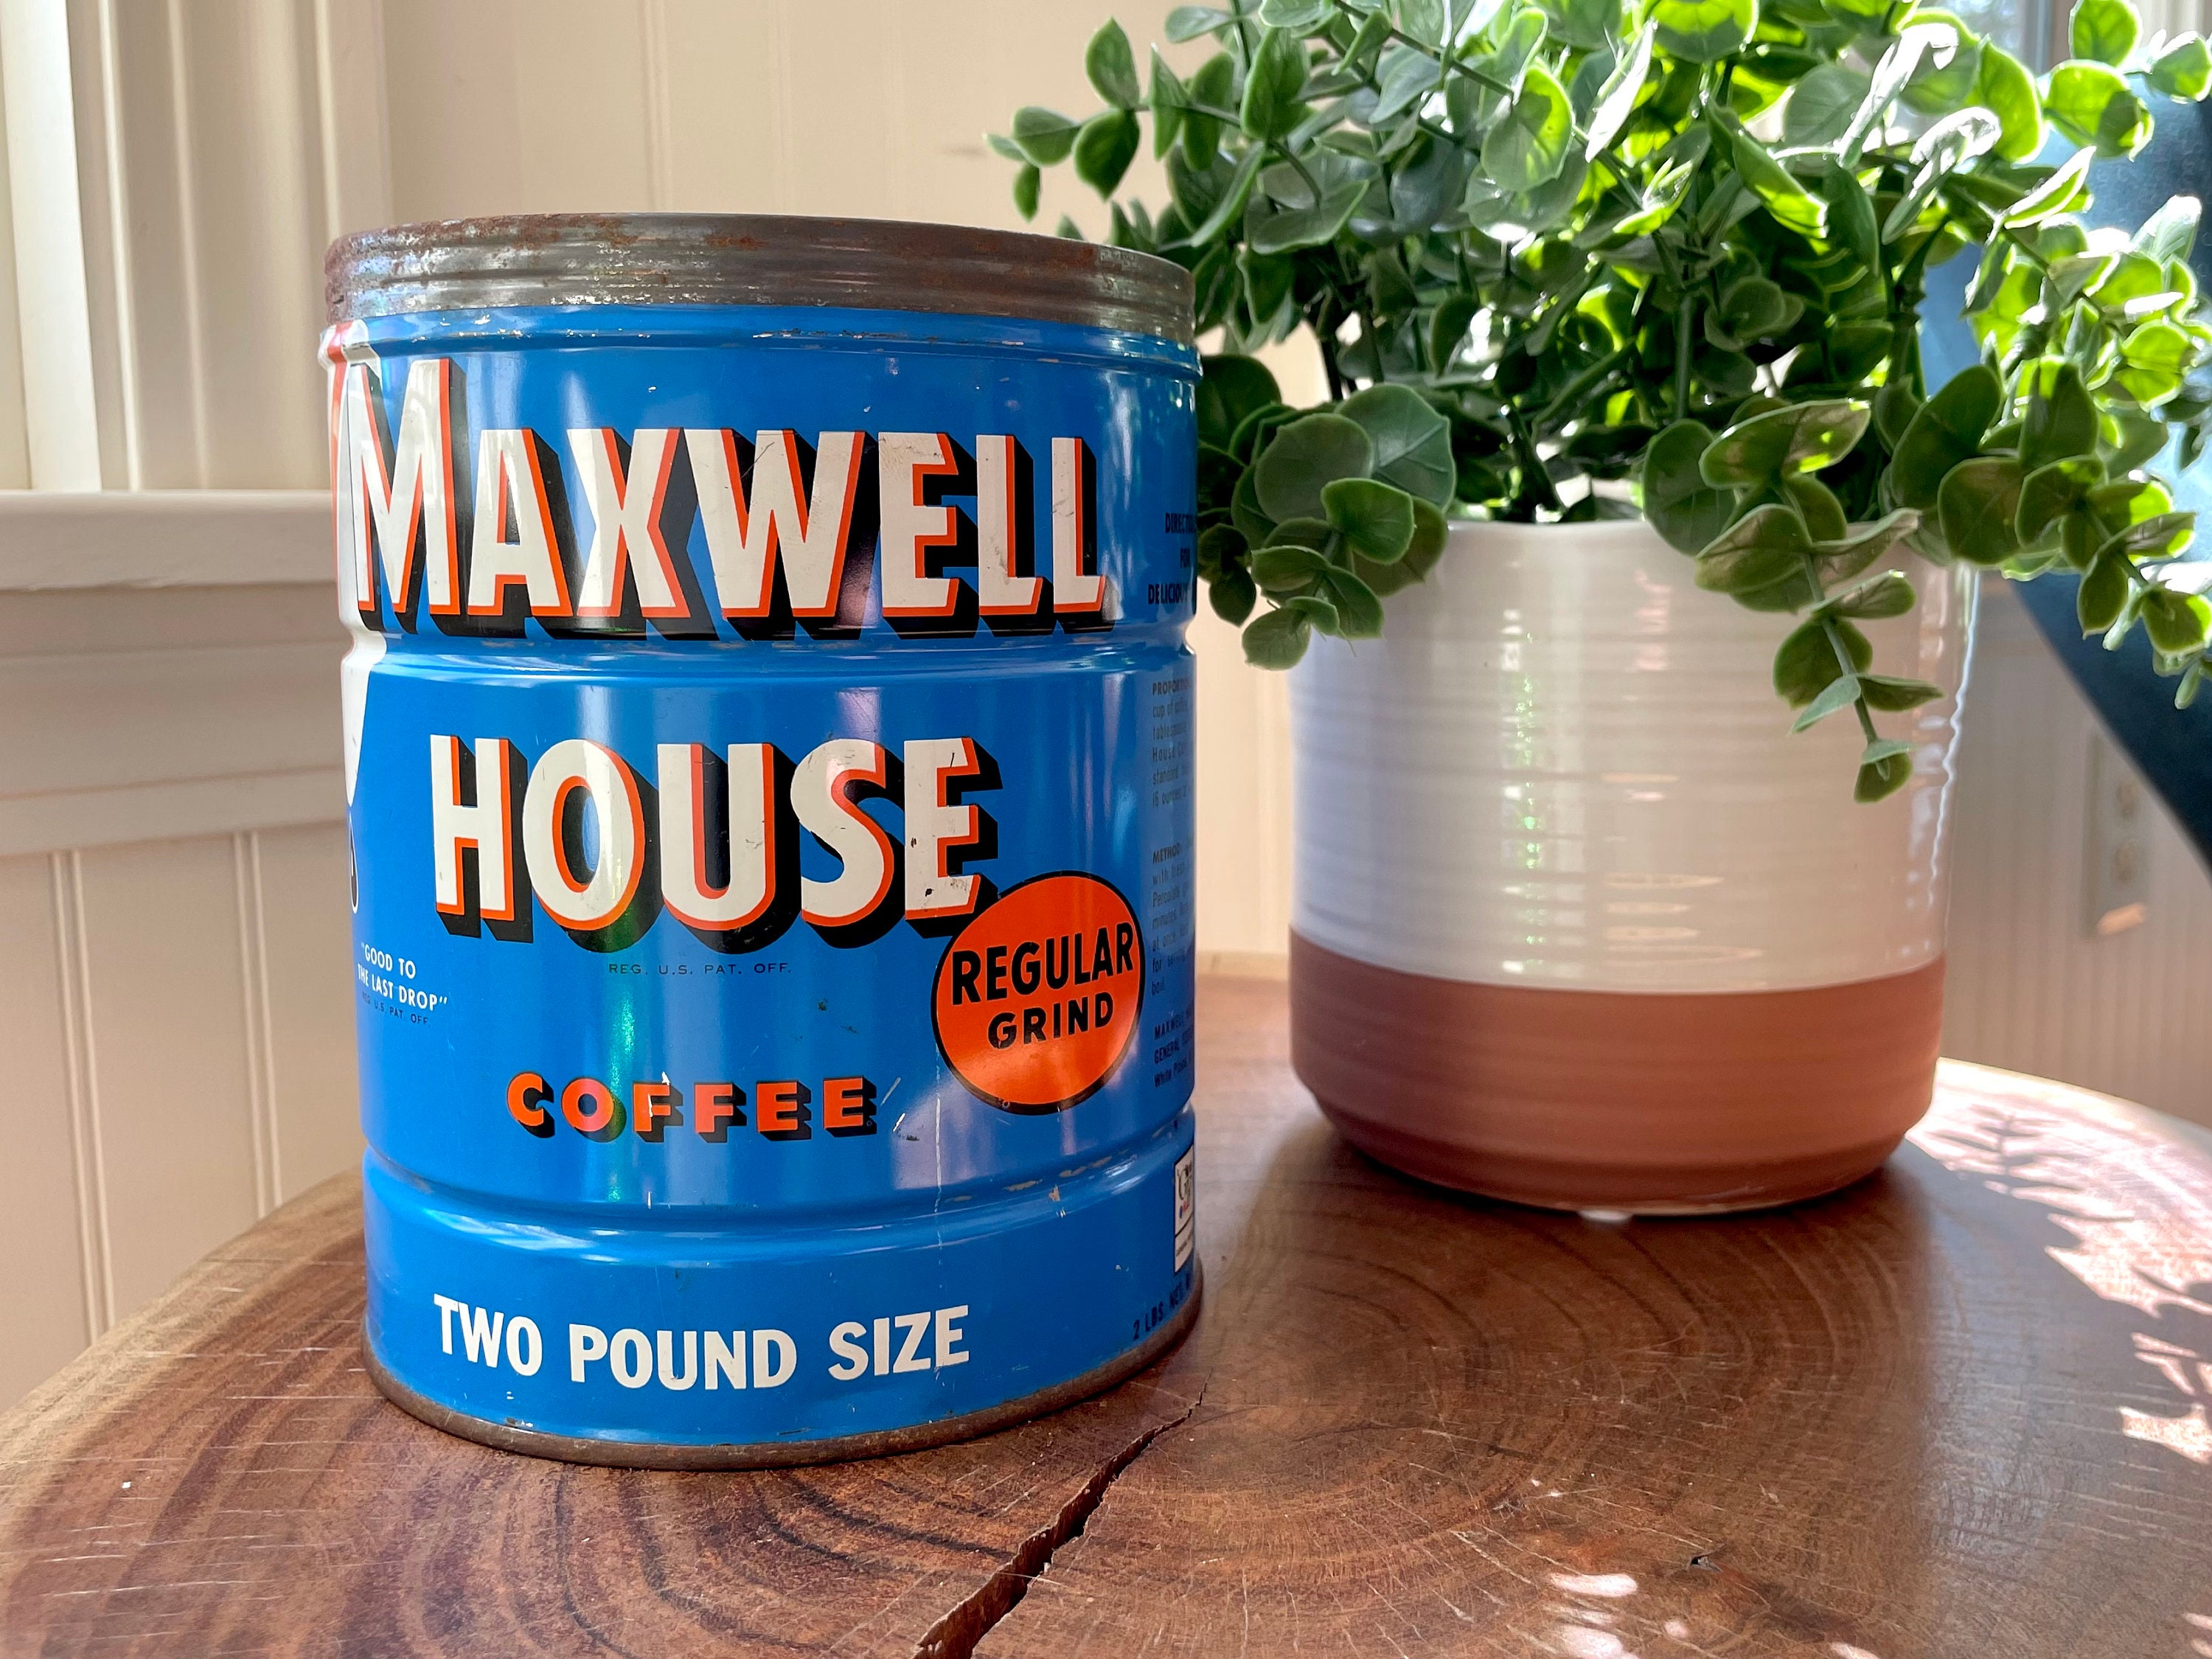 MAXWELL HOUSE COFFEE CAN SHAPED 19 HEAVY DUTY USA MADE METAL ADVERTISING  SIGN